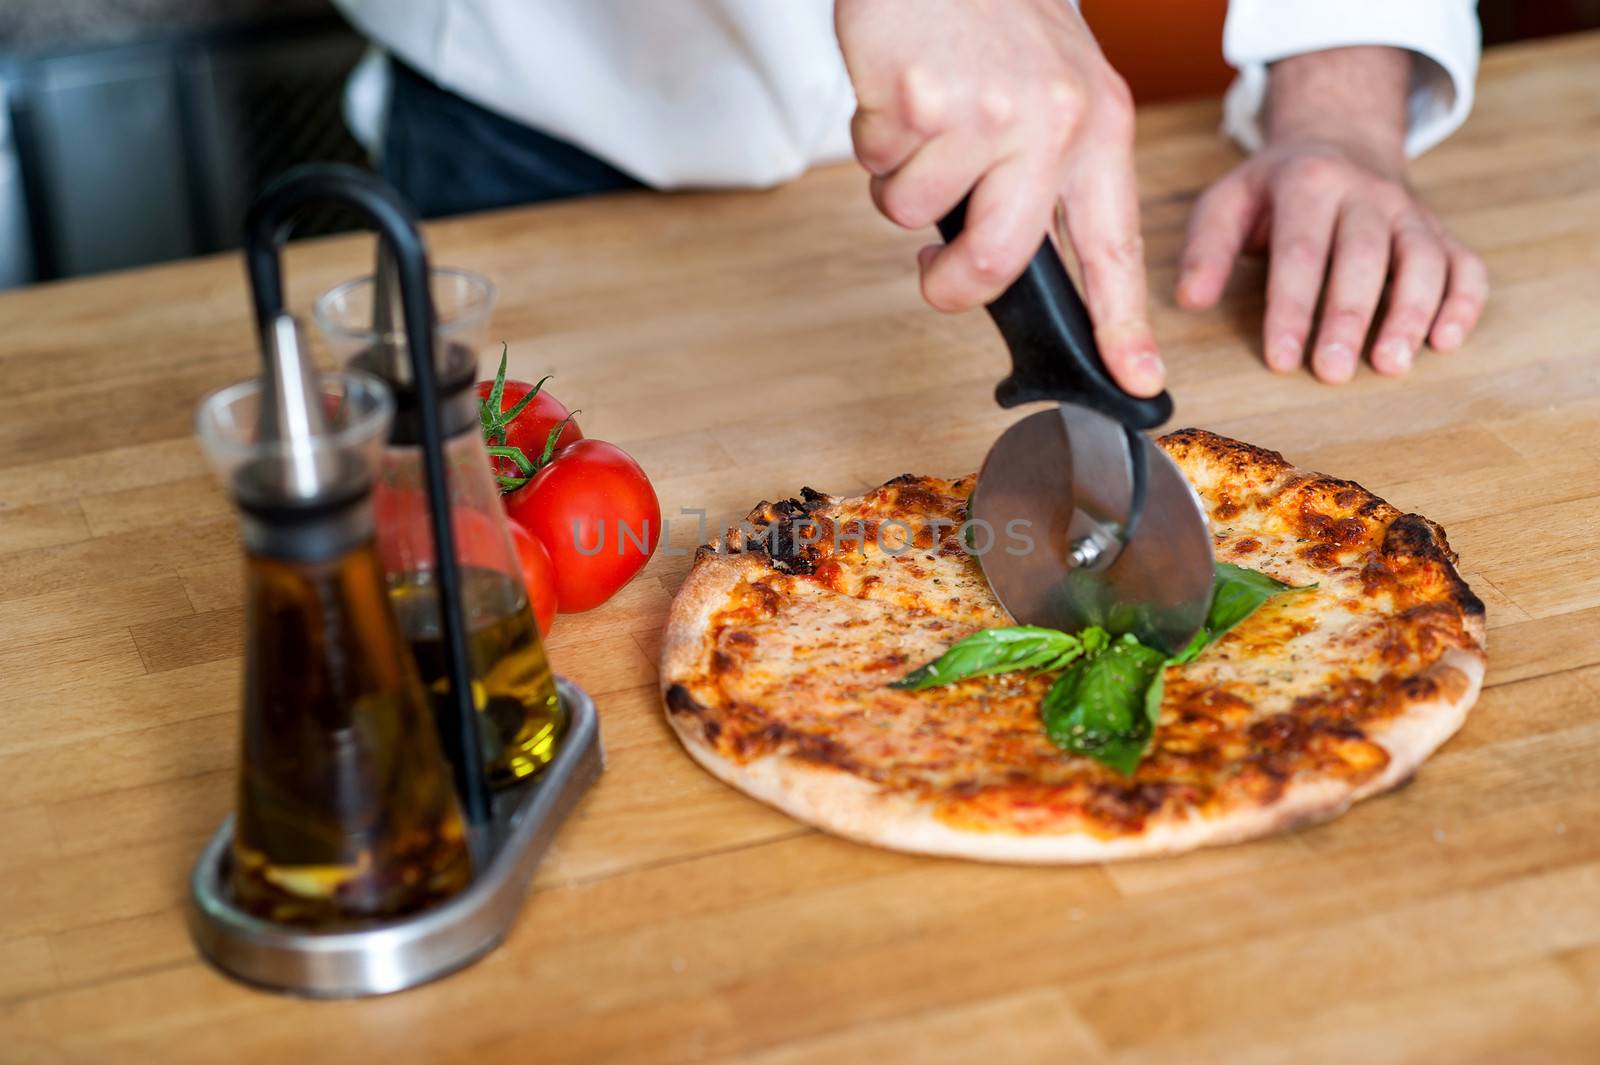 Chef cutting pizza into pieces by stockyimages